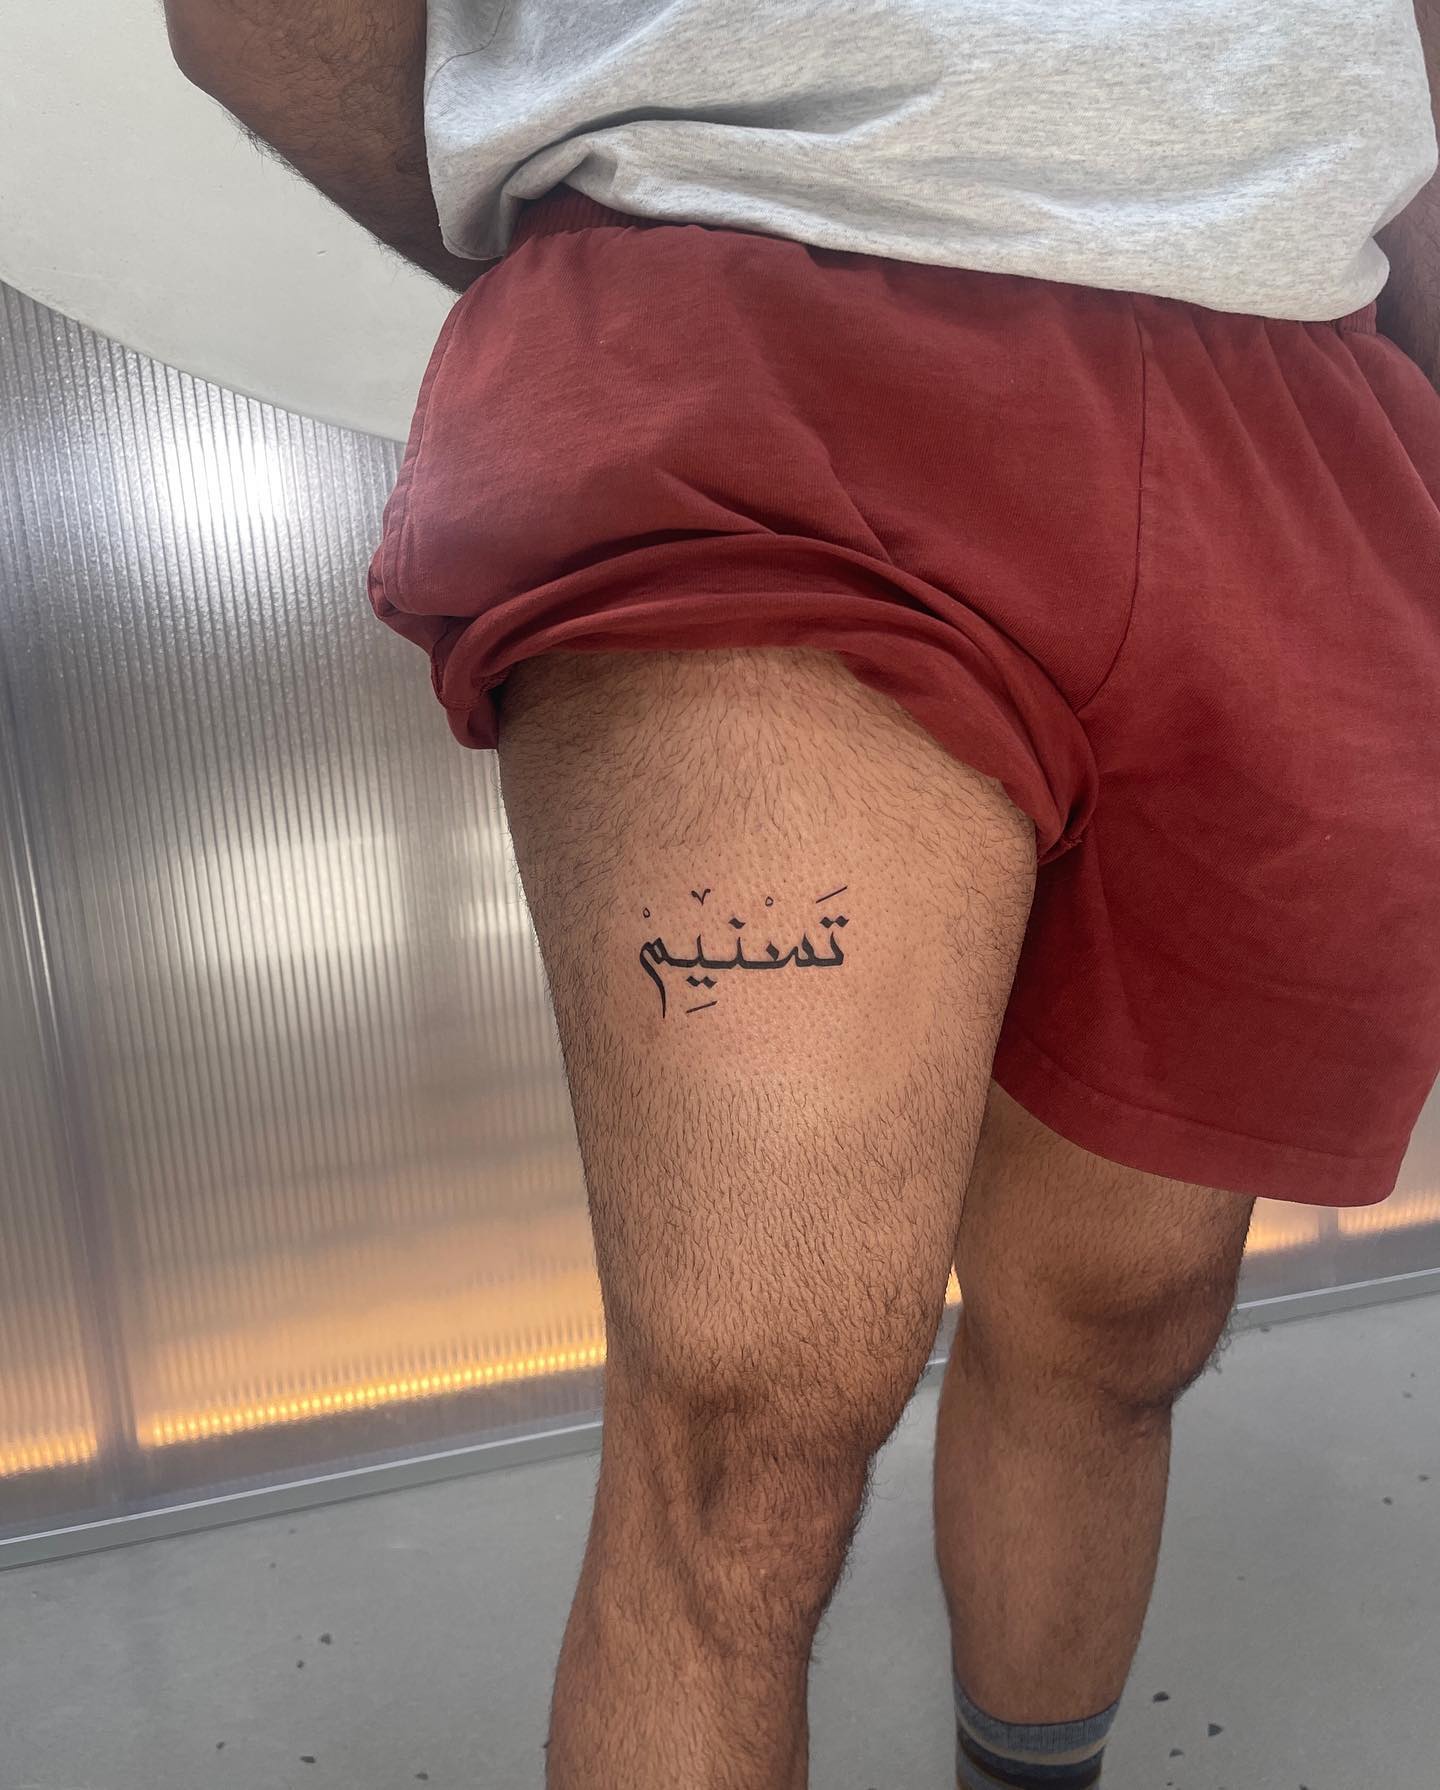 Here is a tattoo of a special name in Arabic. It's called tasnim and it has an amazing meaning: A spring in paradise.